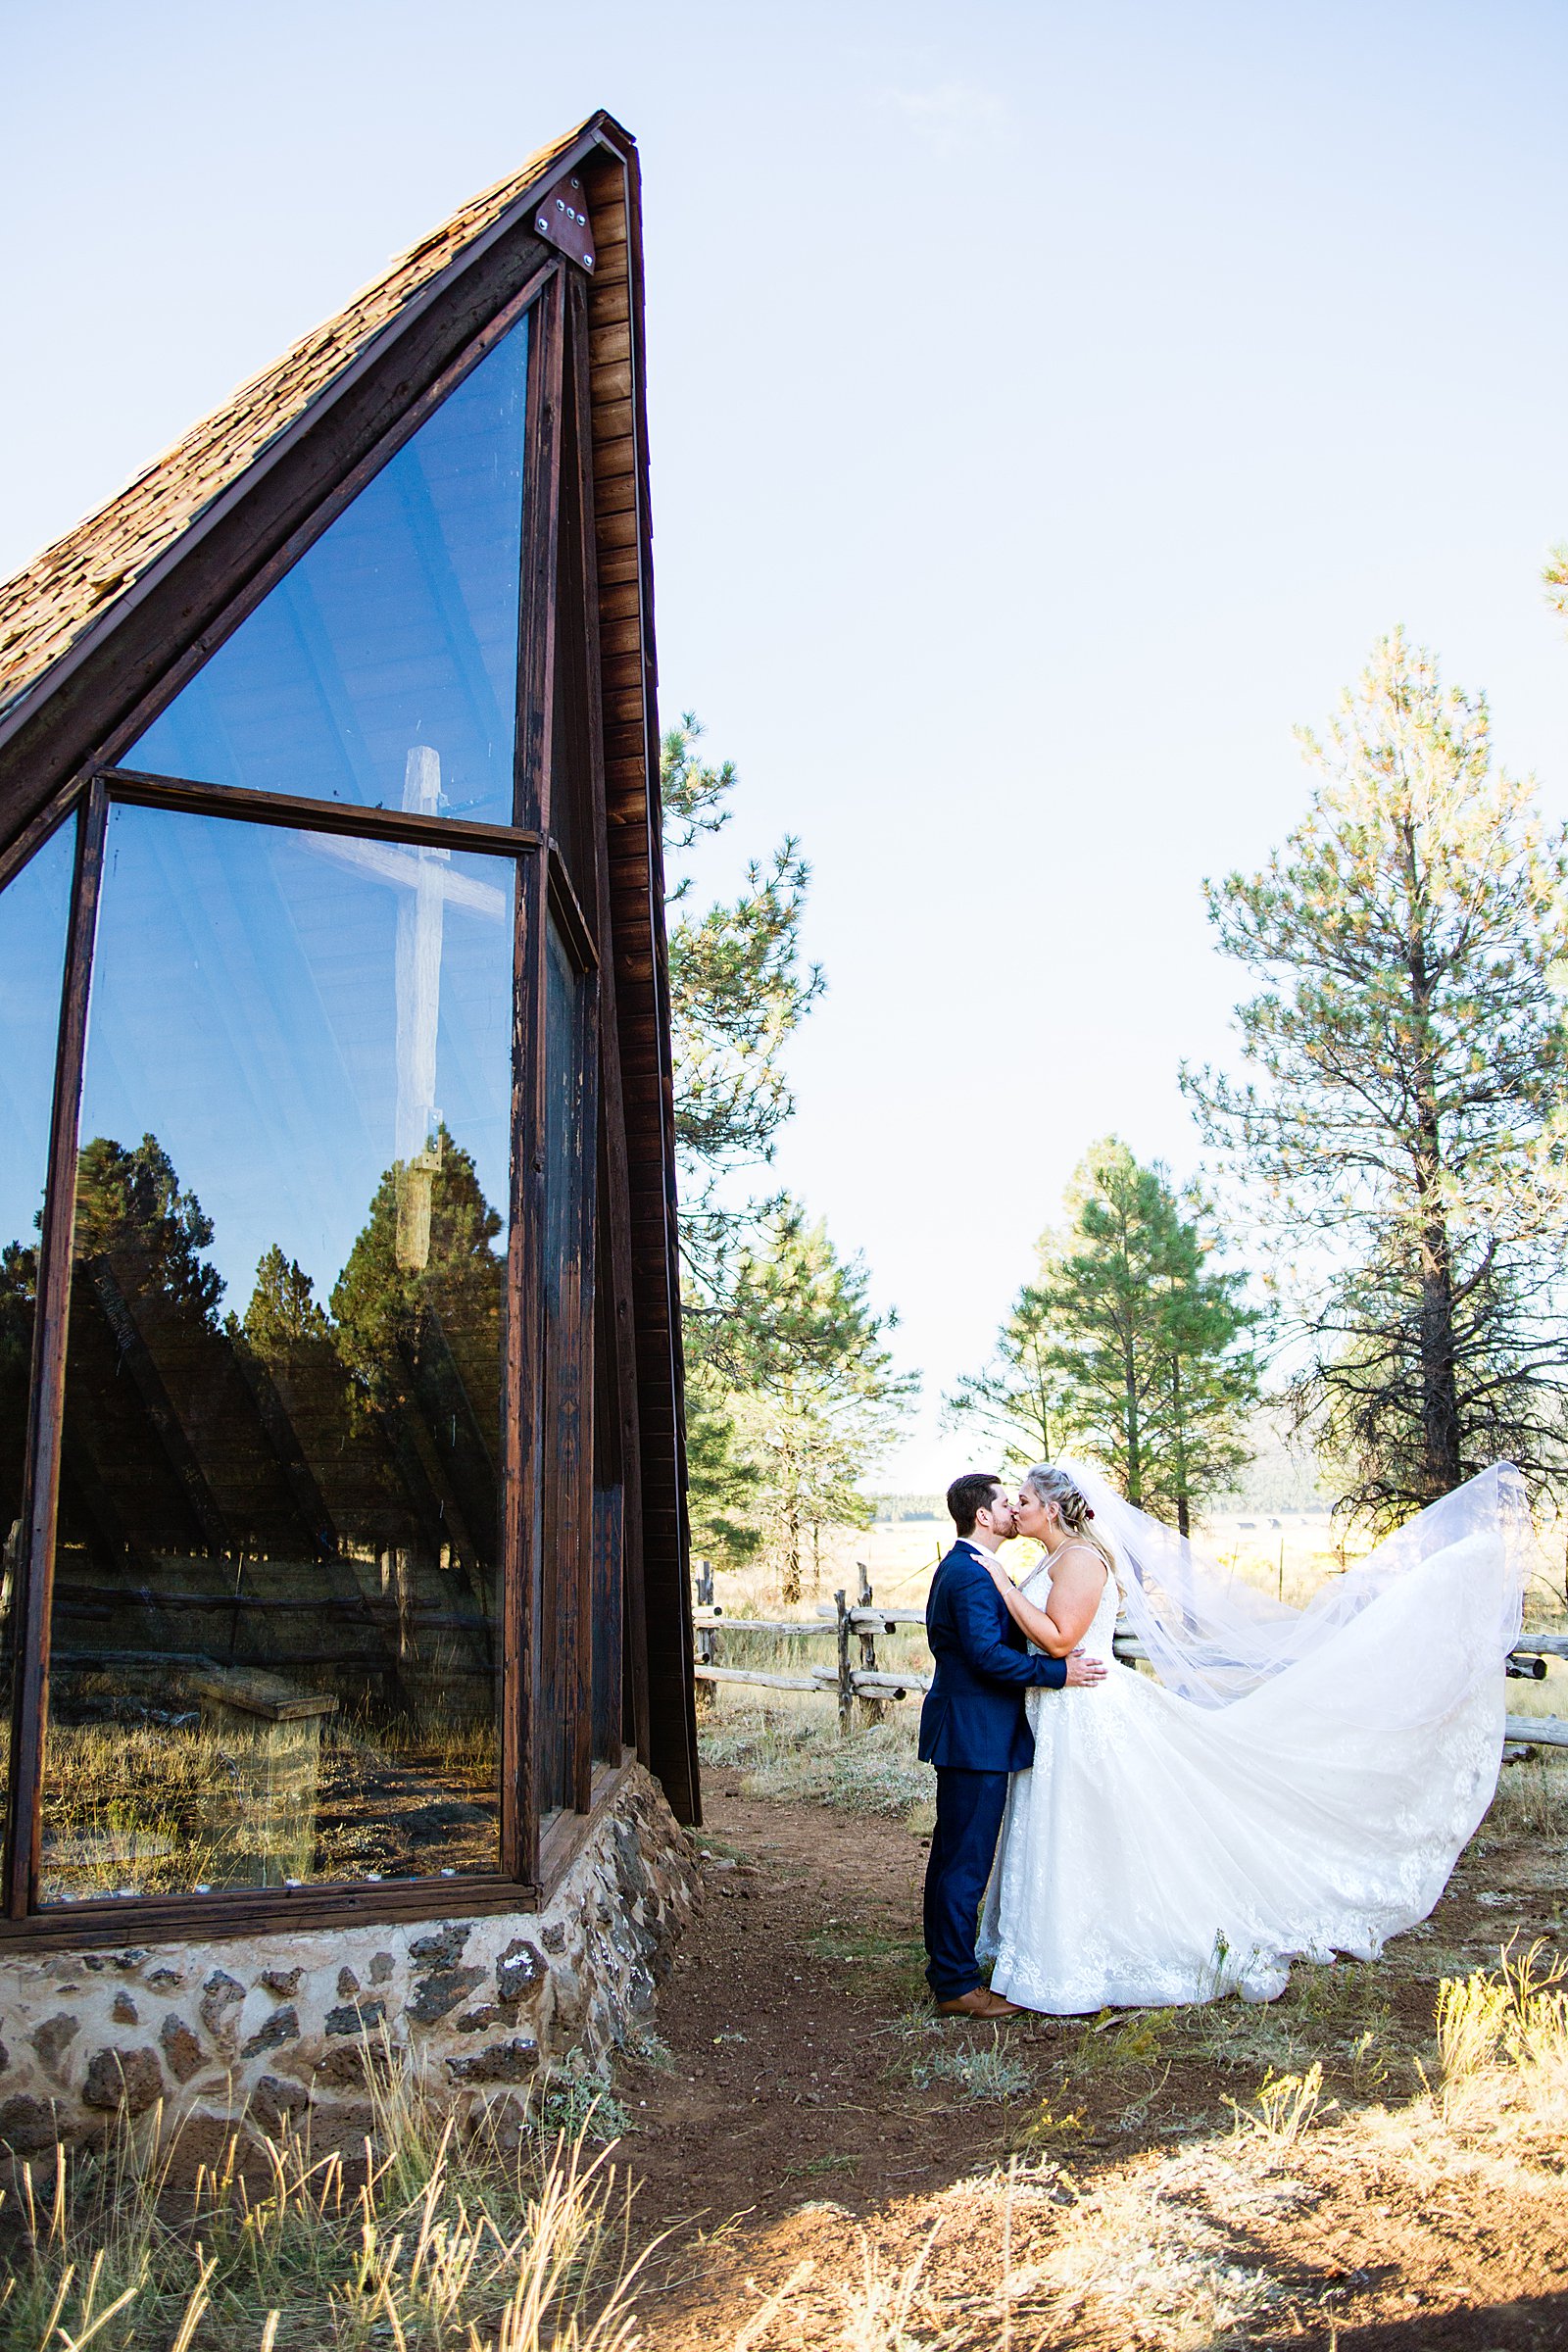 Bride and groom pose for an epic photo at Chapel of the Holy Dove by Flagstaff wedding photographer PMA Photography.